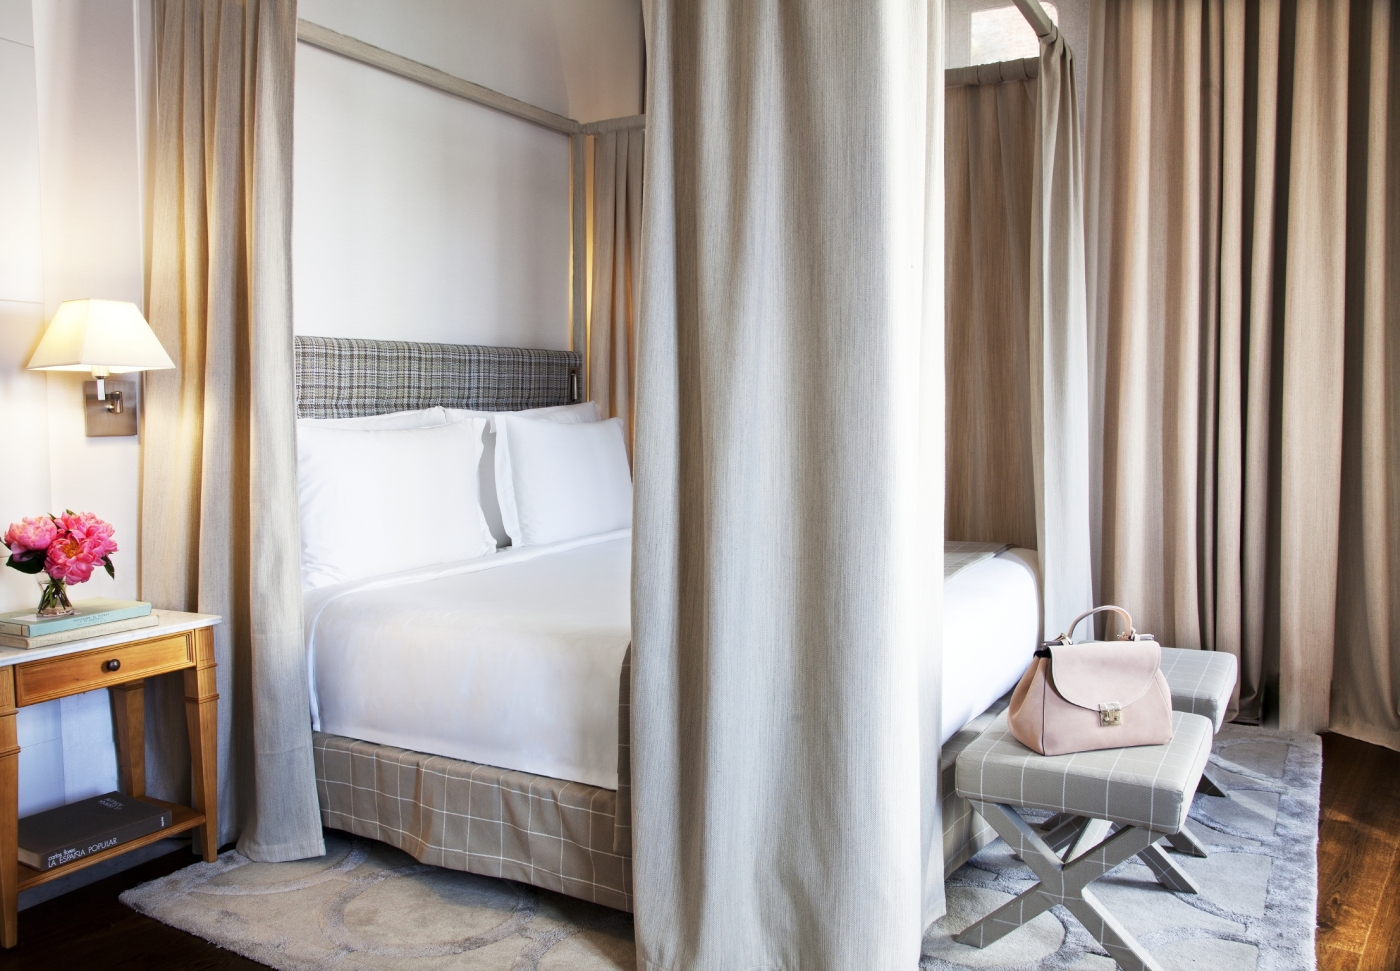 Bedroom at URSO Hotel and Spa Madrid Spain